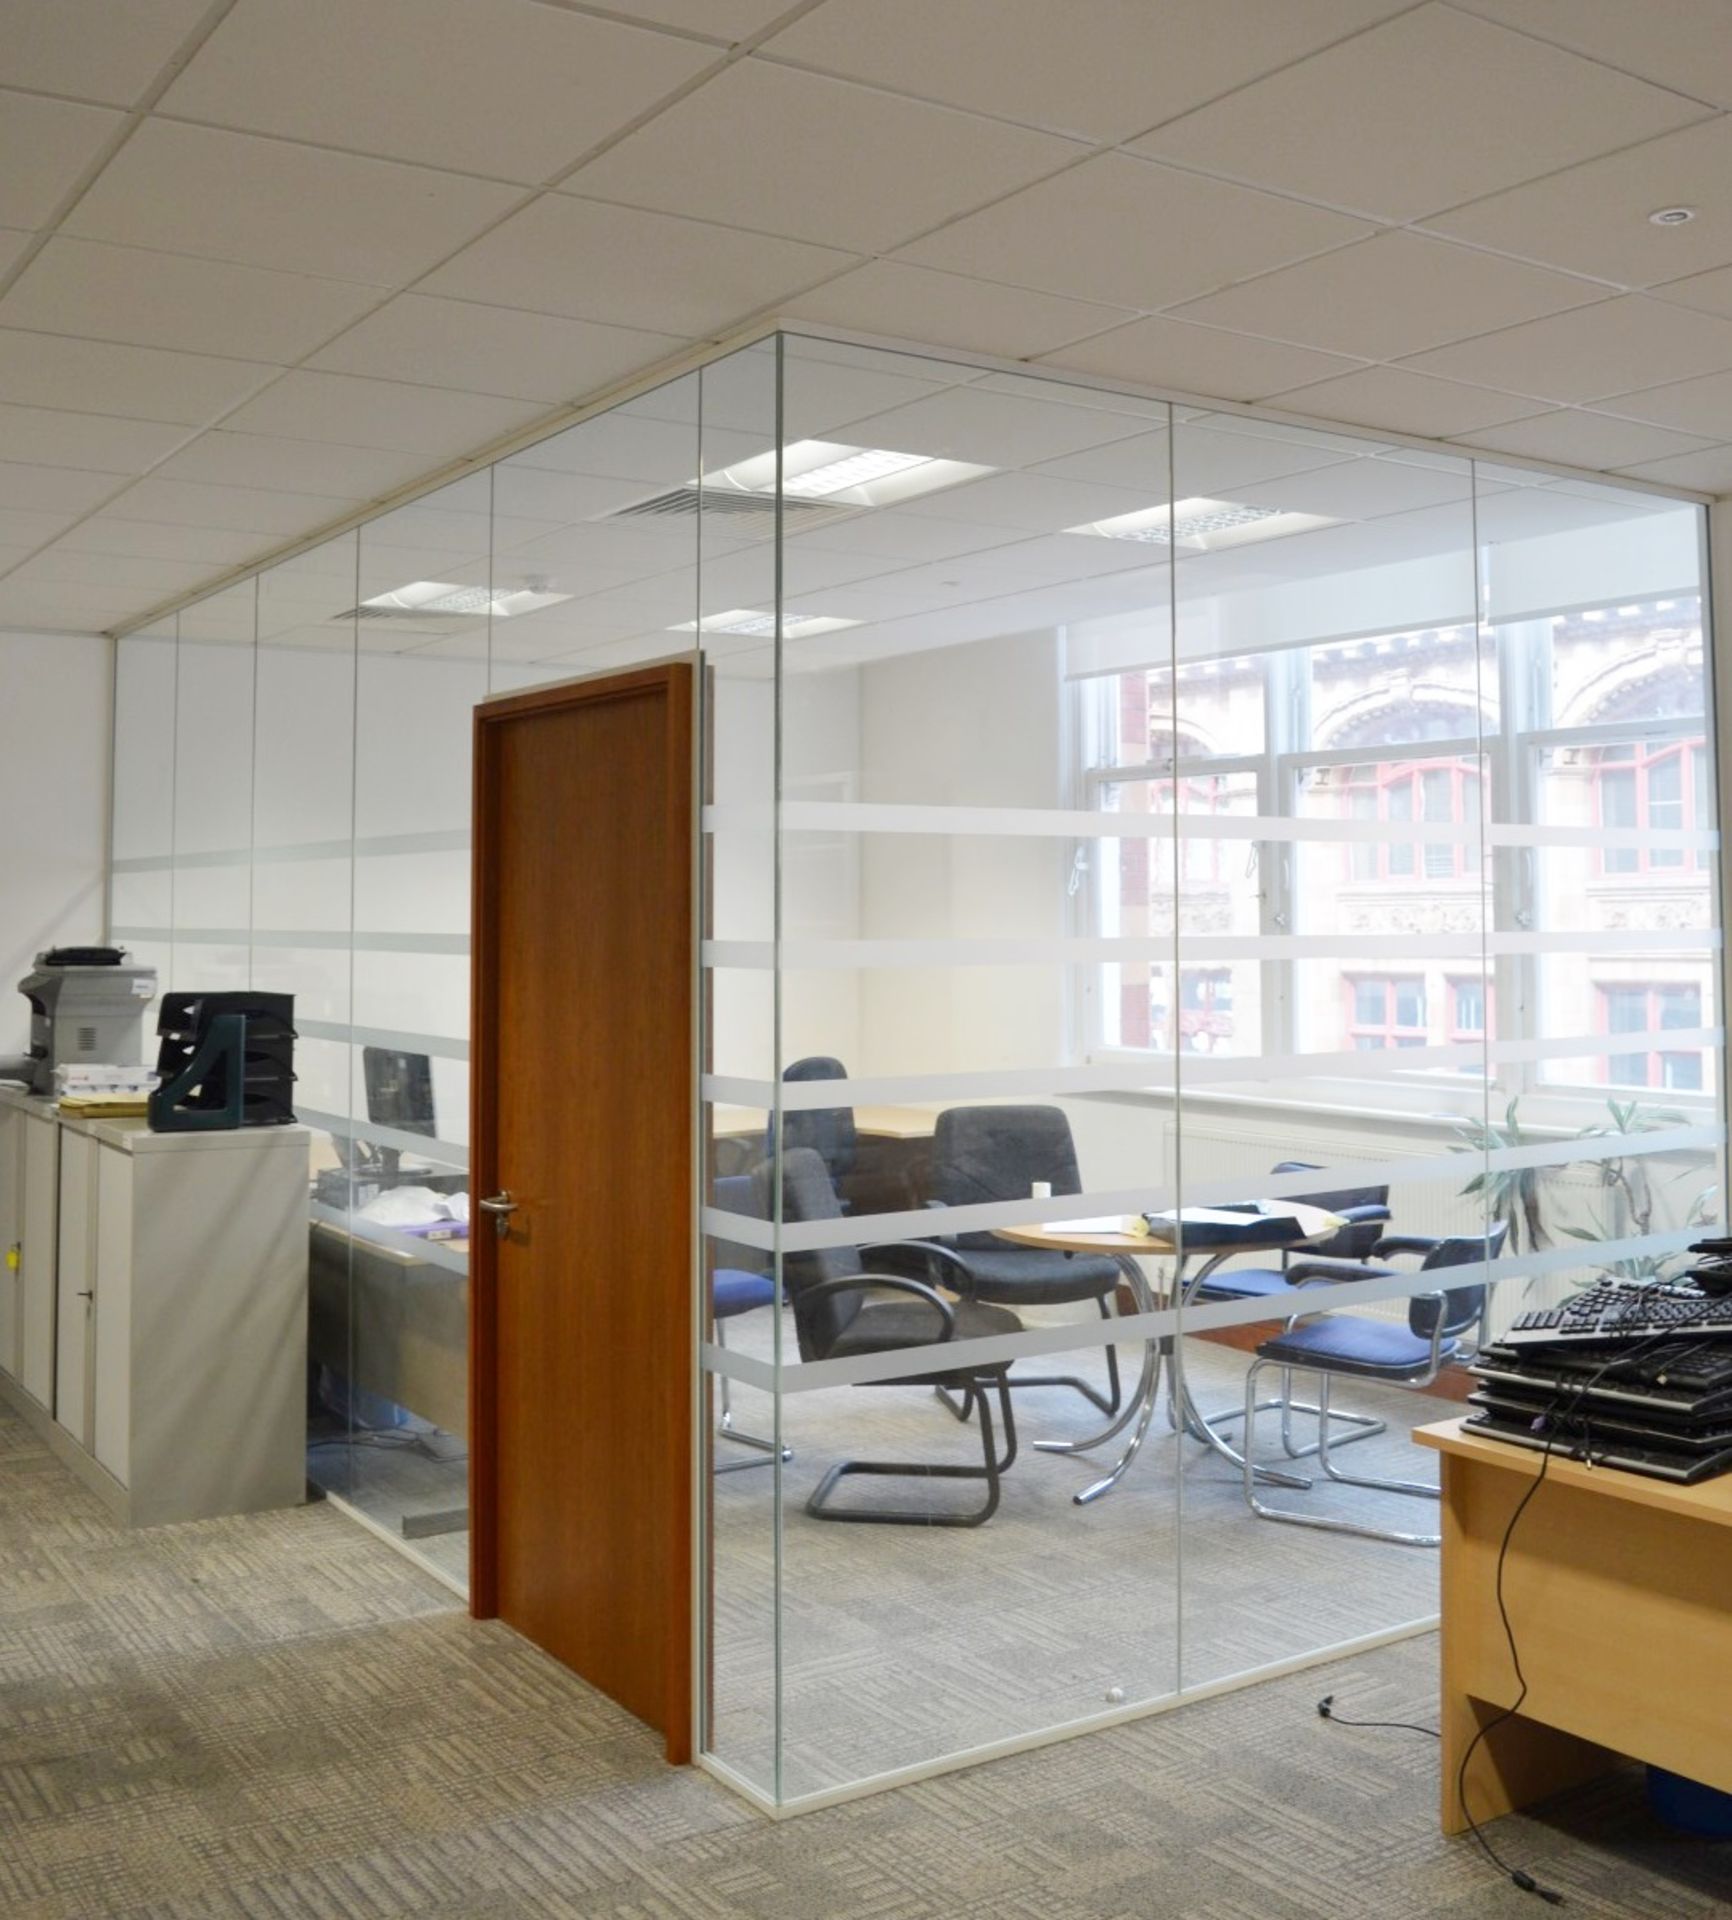 1 x Frameless Glass Partition Corner Office - Perfect For Creating a Contemporary Office Space in - Image 11 of 12